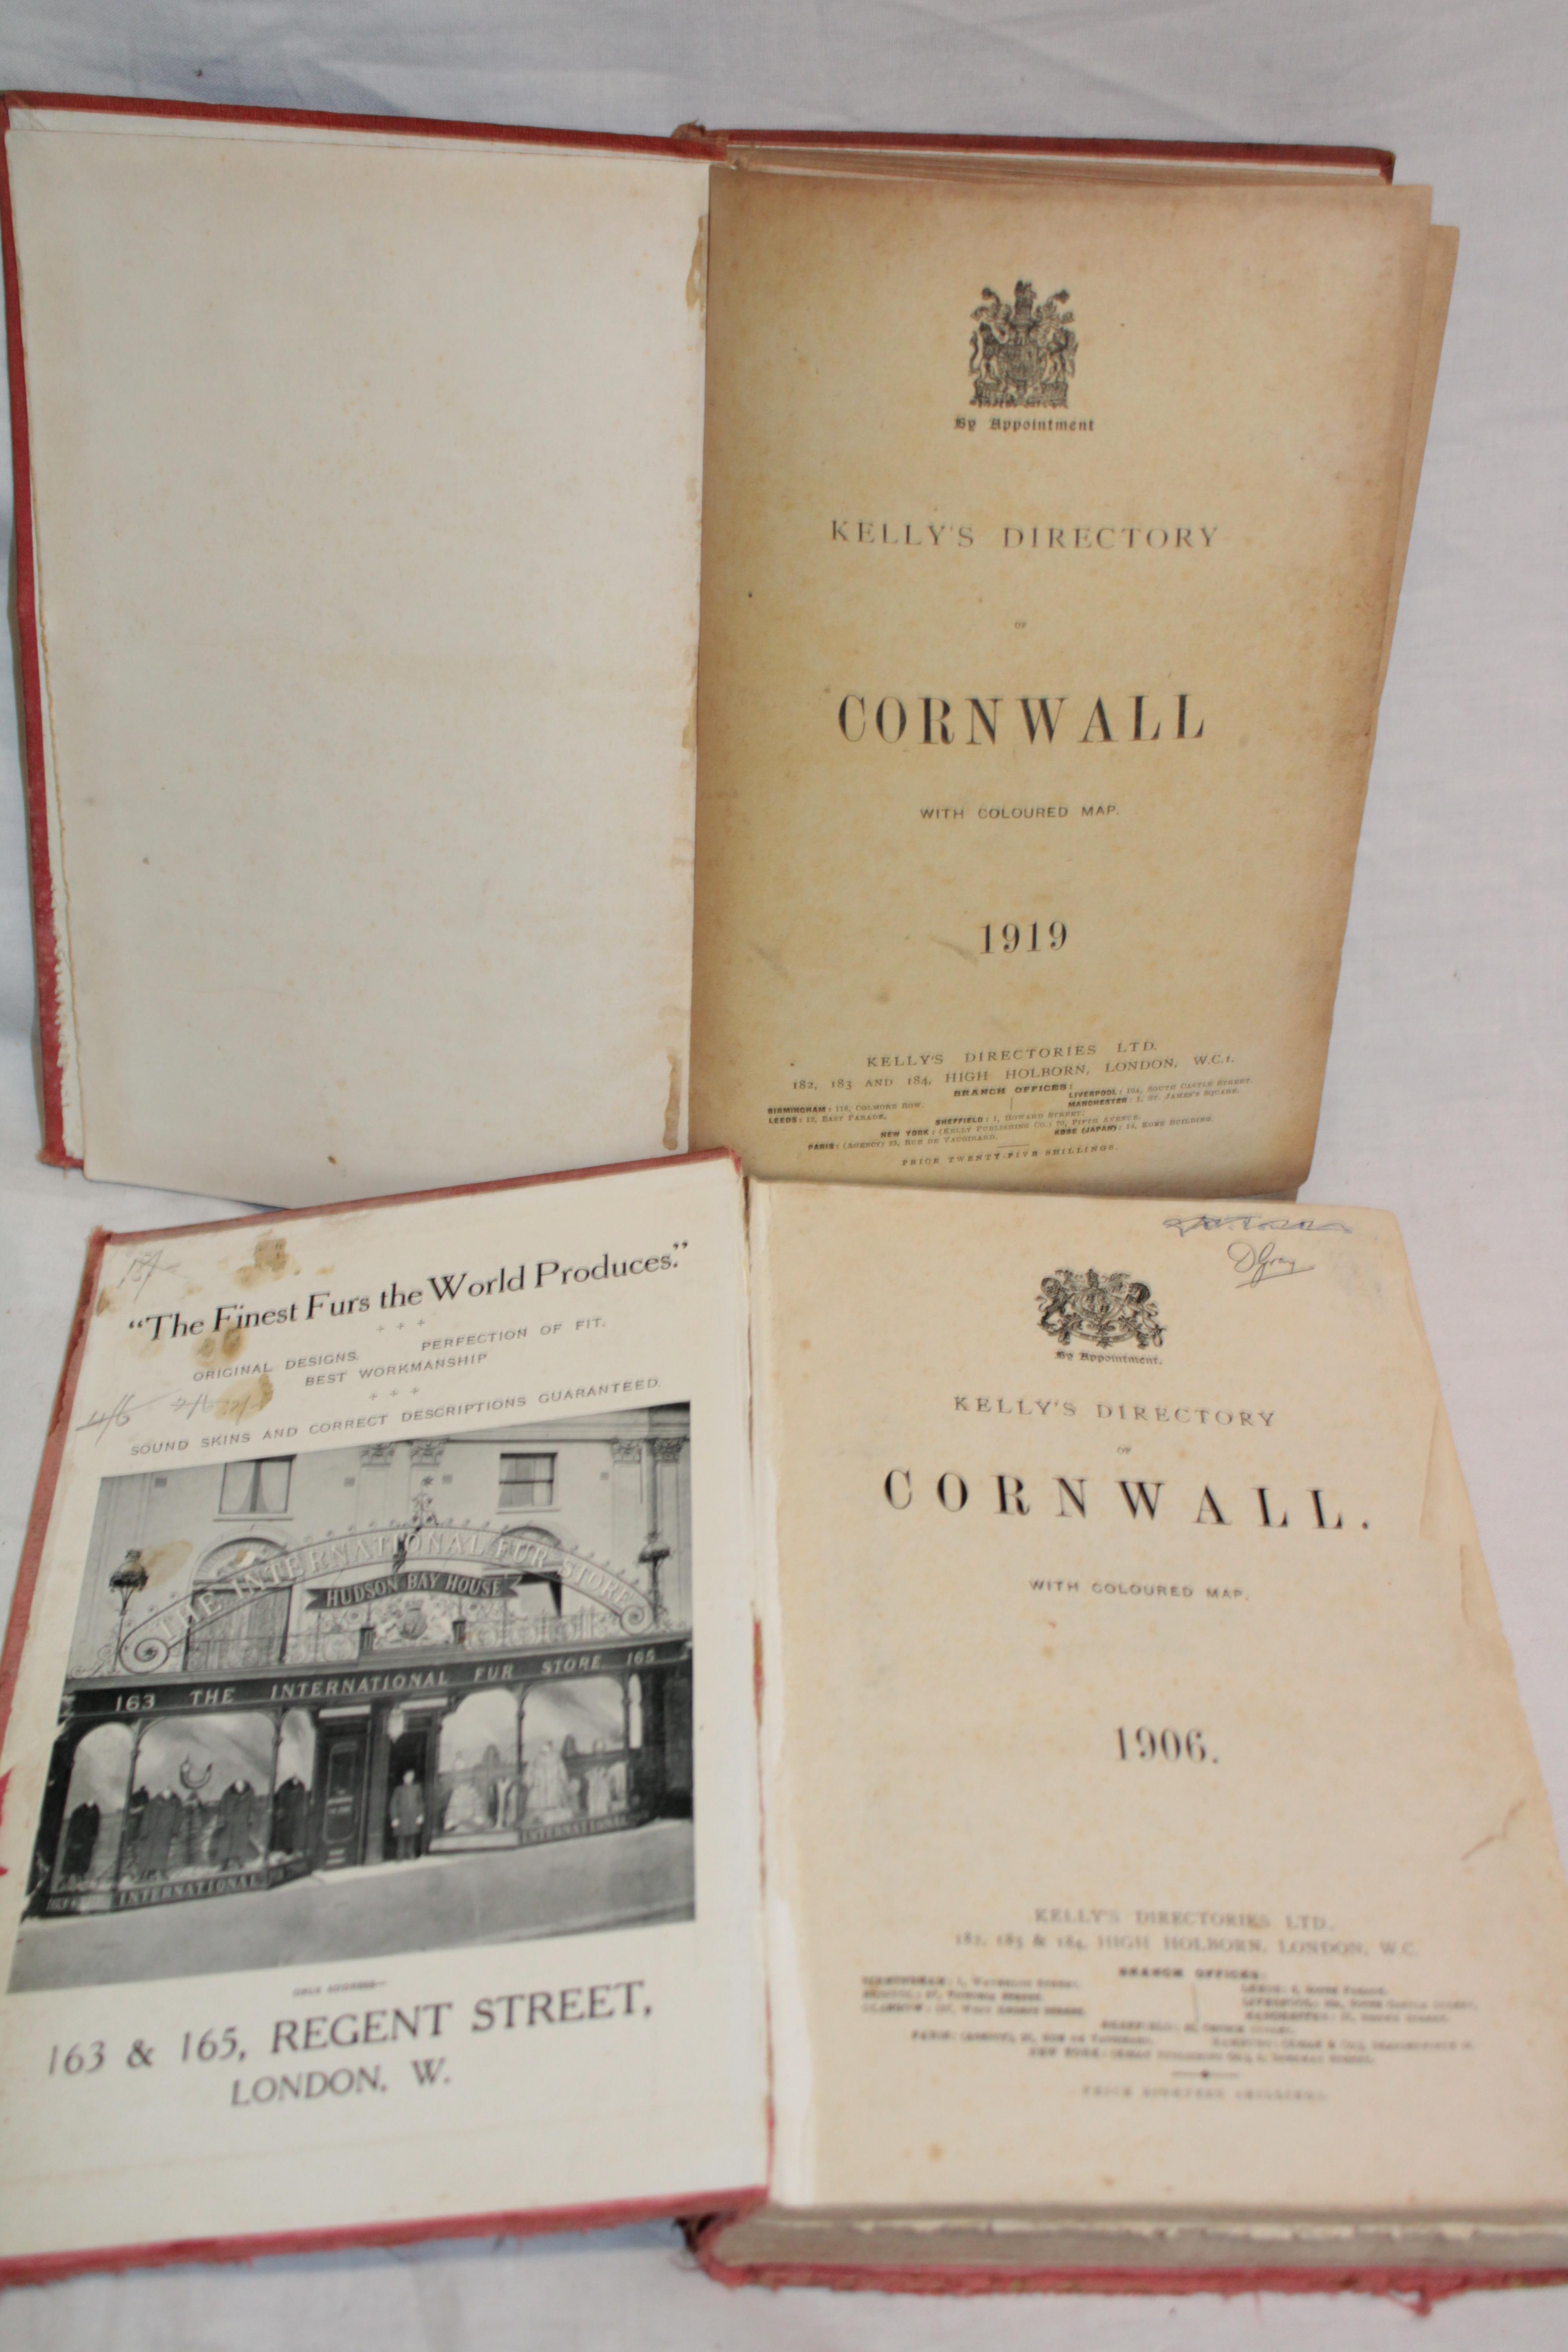 Two Kelly's Directories of Cornwall - 1906 and 1919